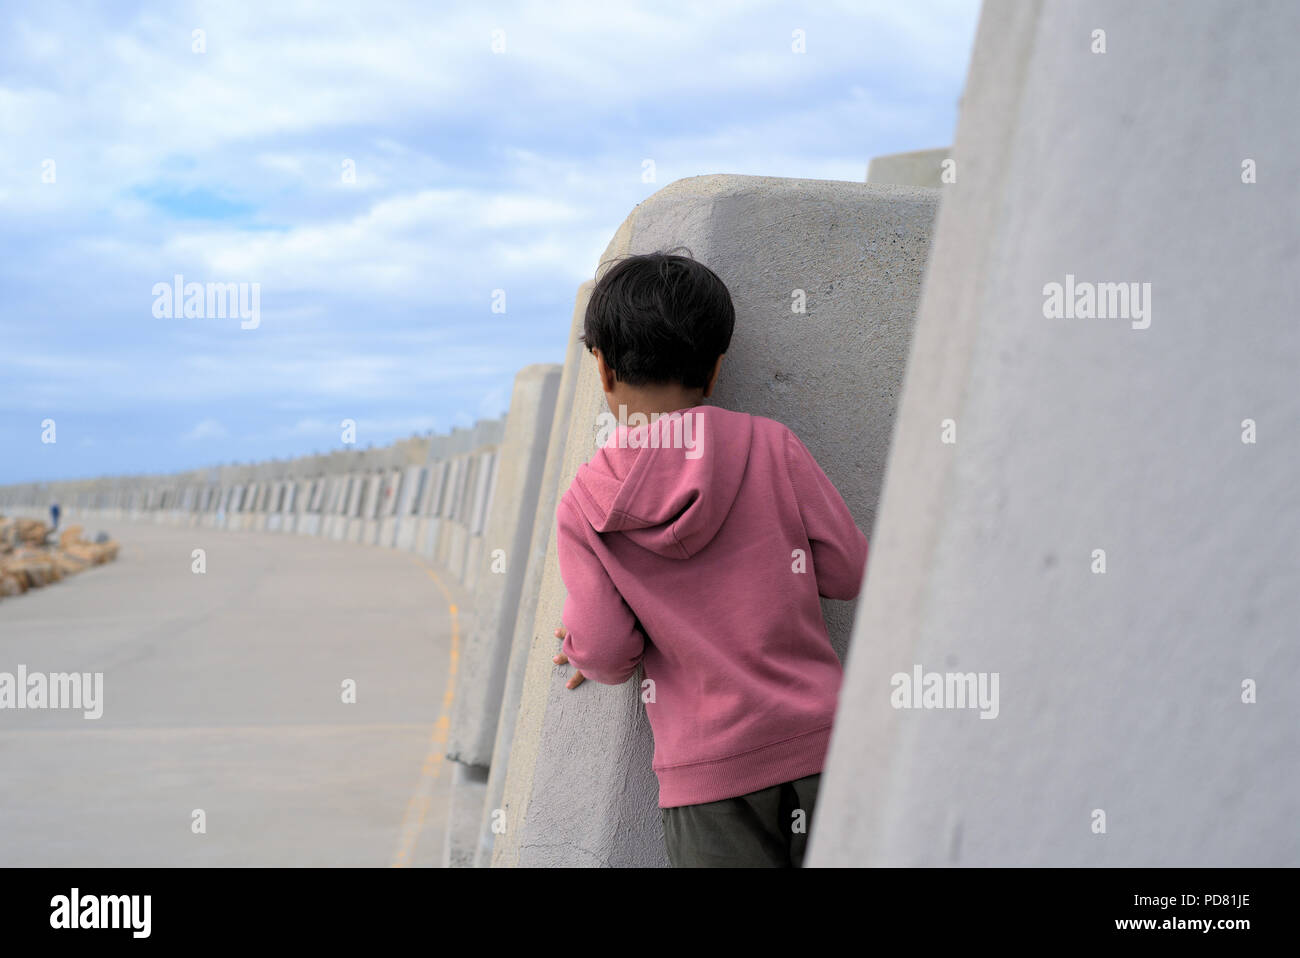 Playing hide and seek. Kid peeking from behind the wall outdoor. Child hiding behind wall. Stock Photo